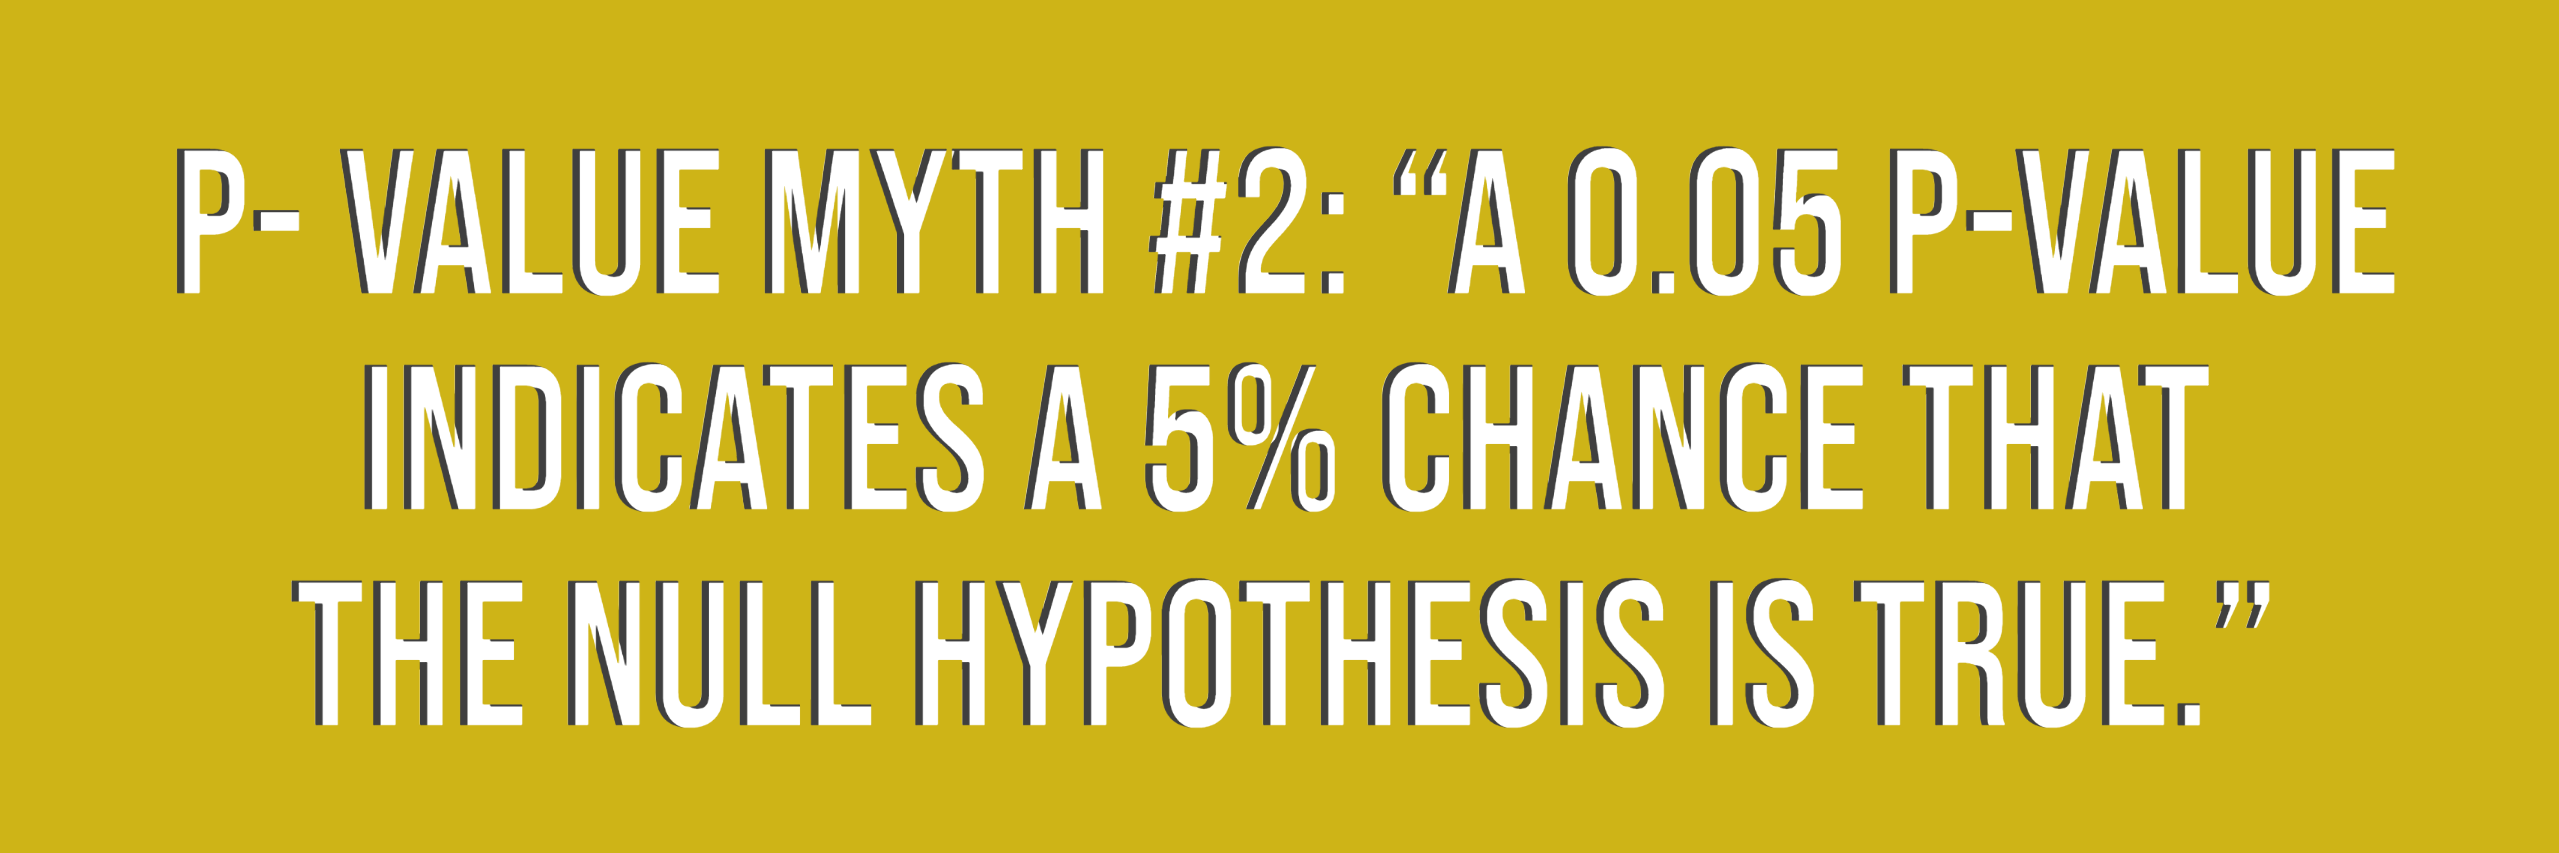 p value myth a 0.05 p value indicates a 5% chance that the null hypothesis is true